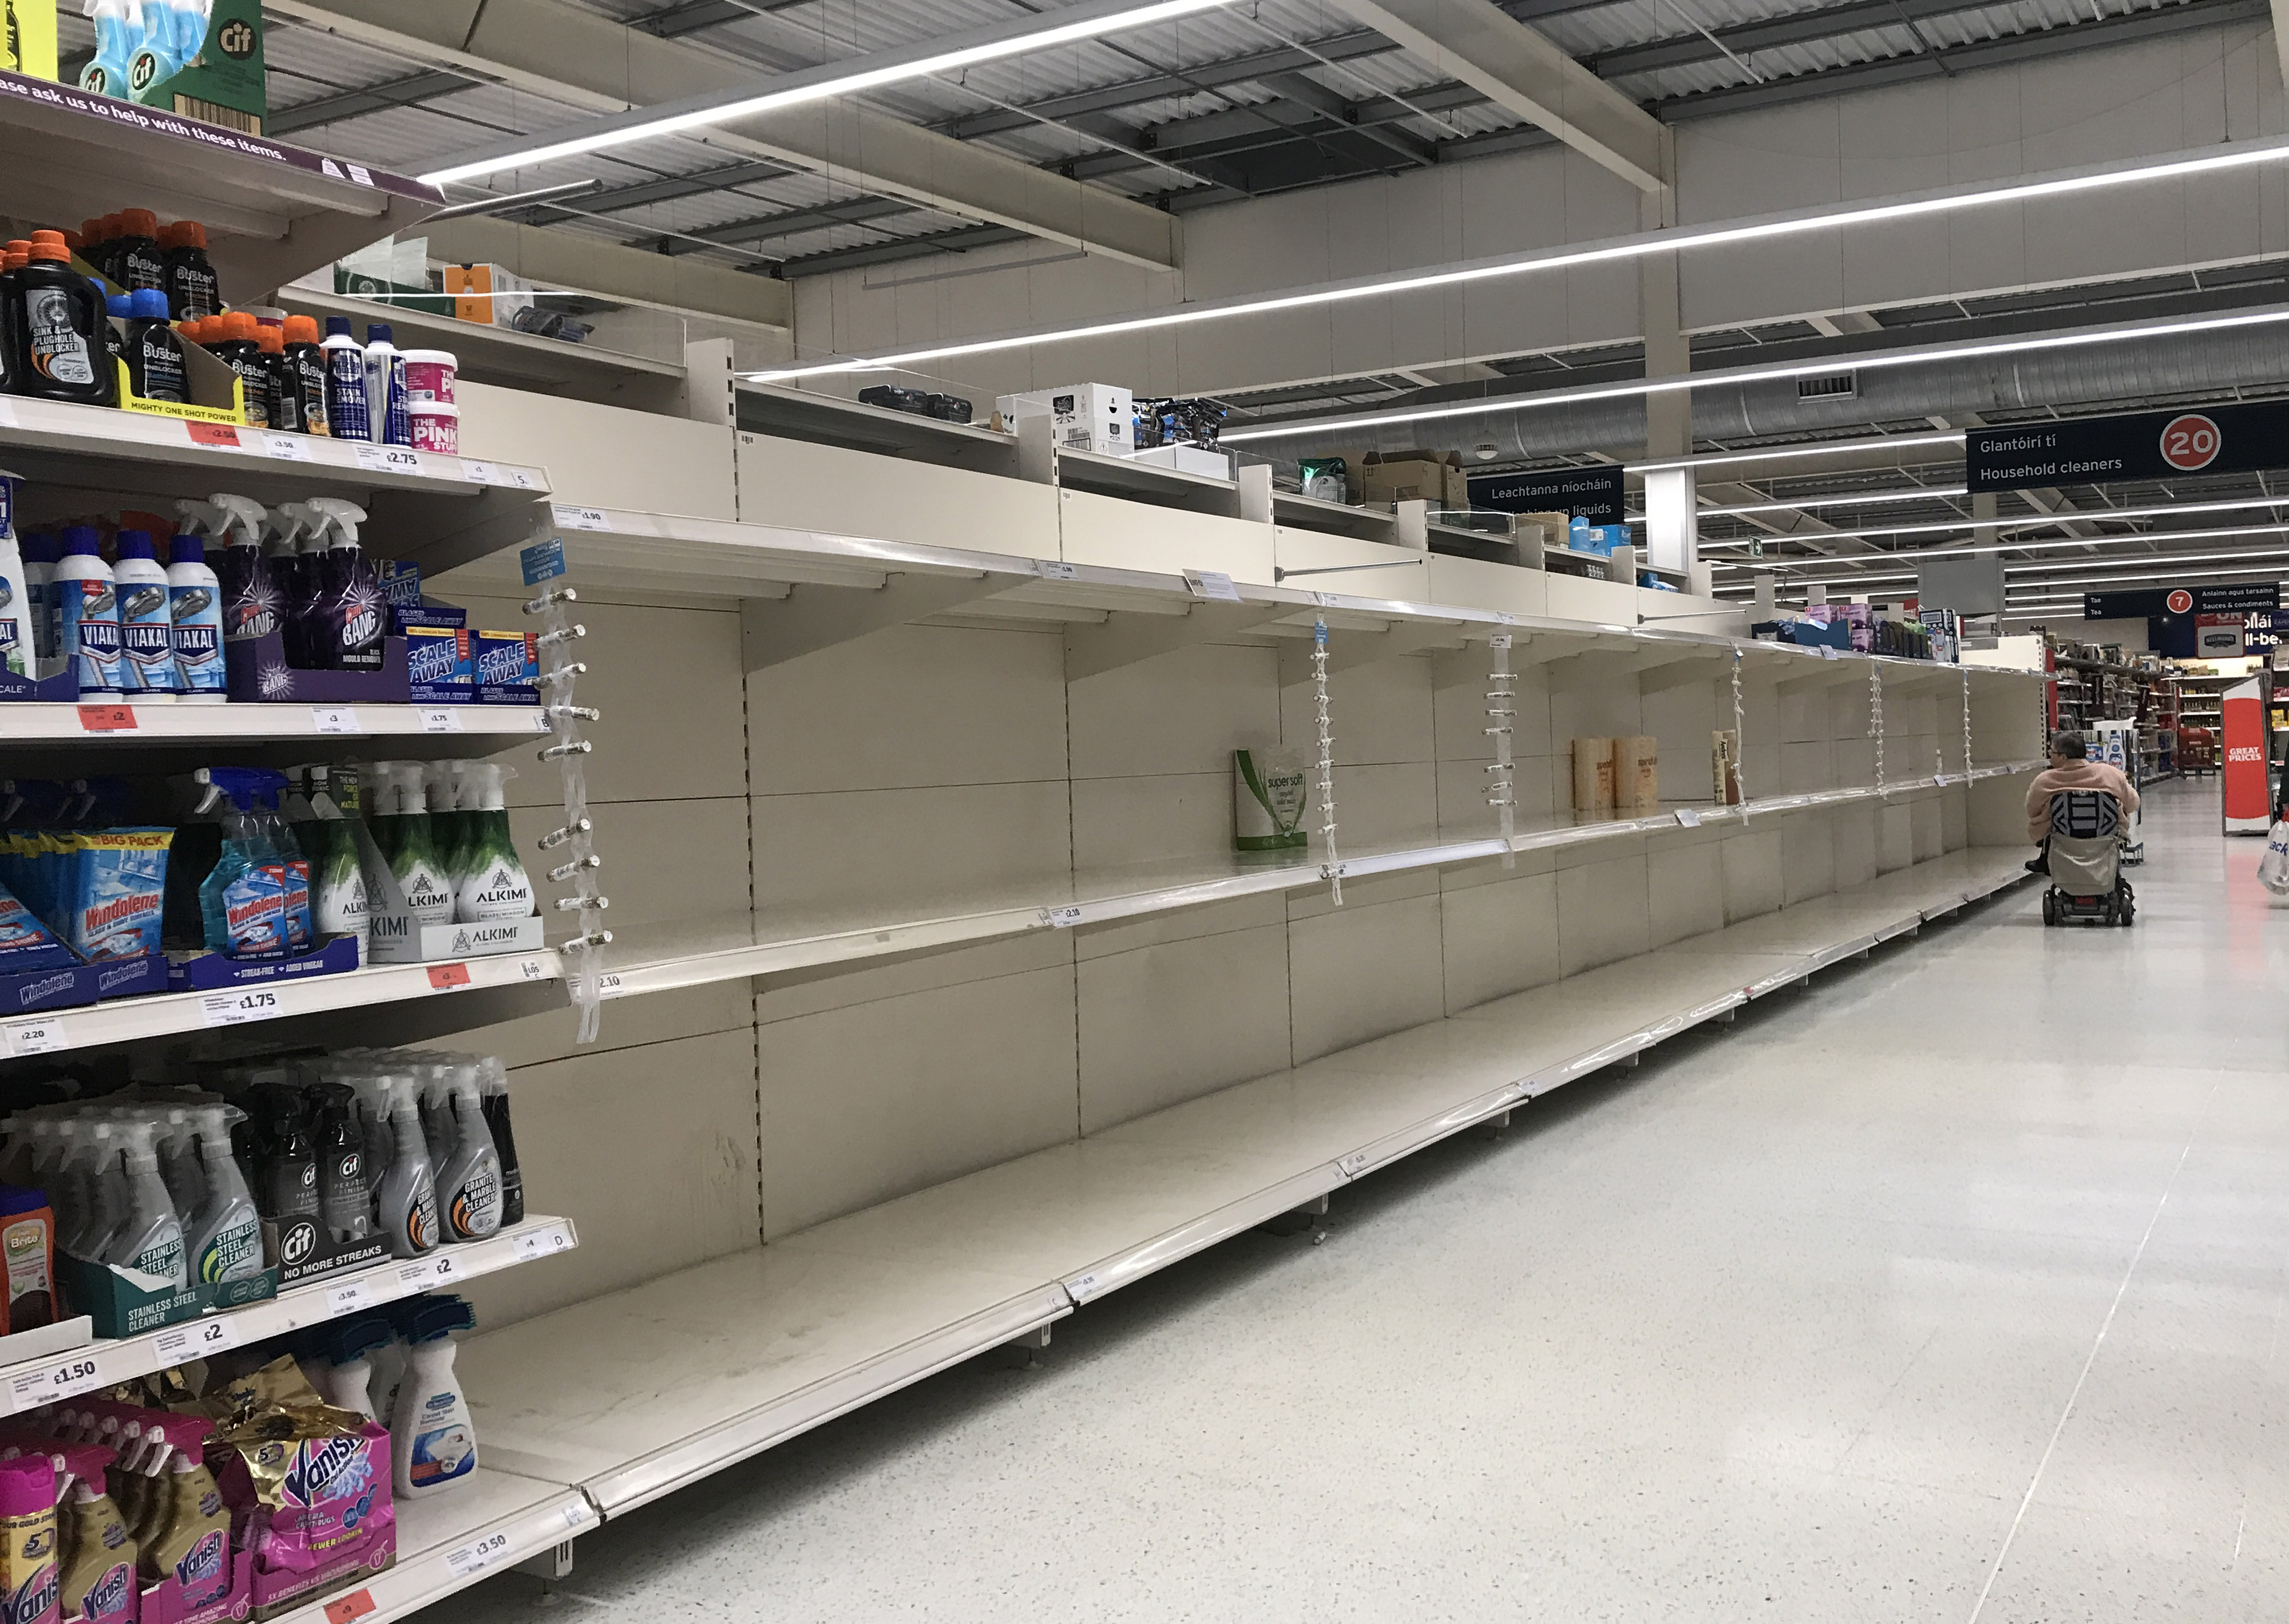 A Sainsbury's supermarket in B is pictured with empty shelves where hand wash and sanitizers would normally be on display.